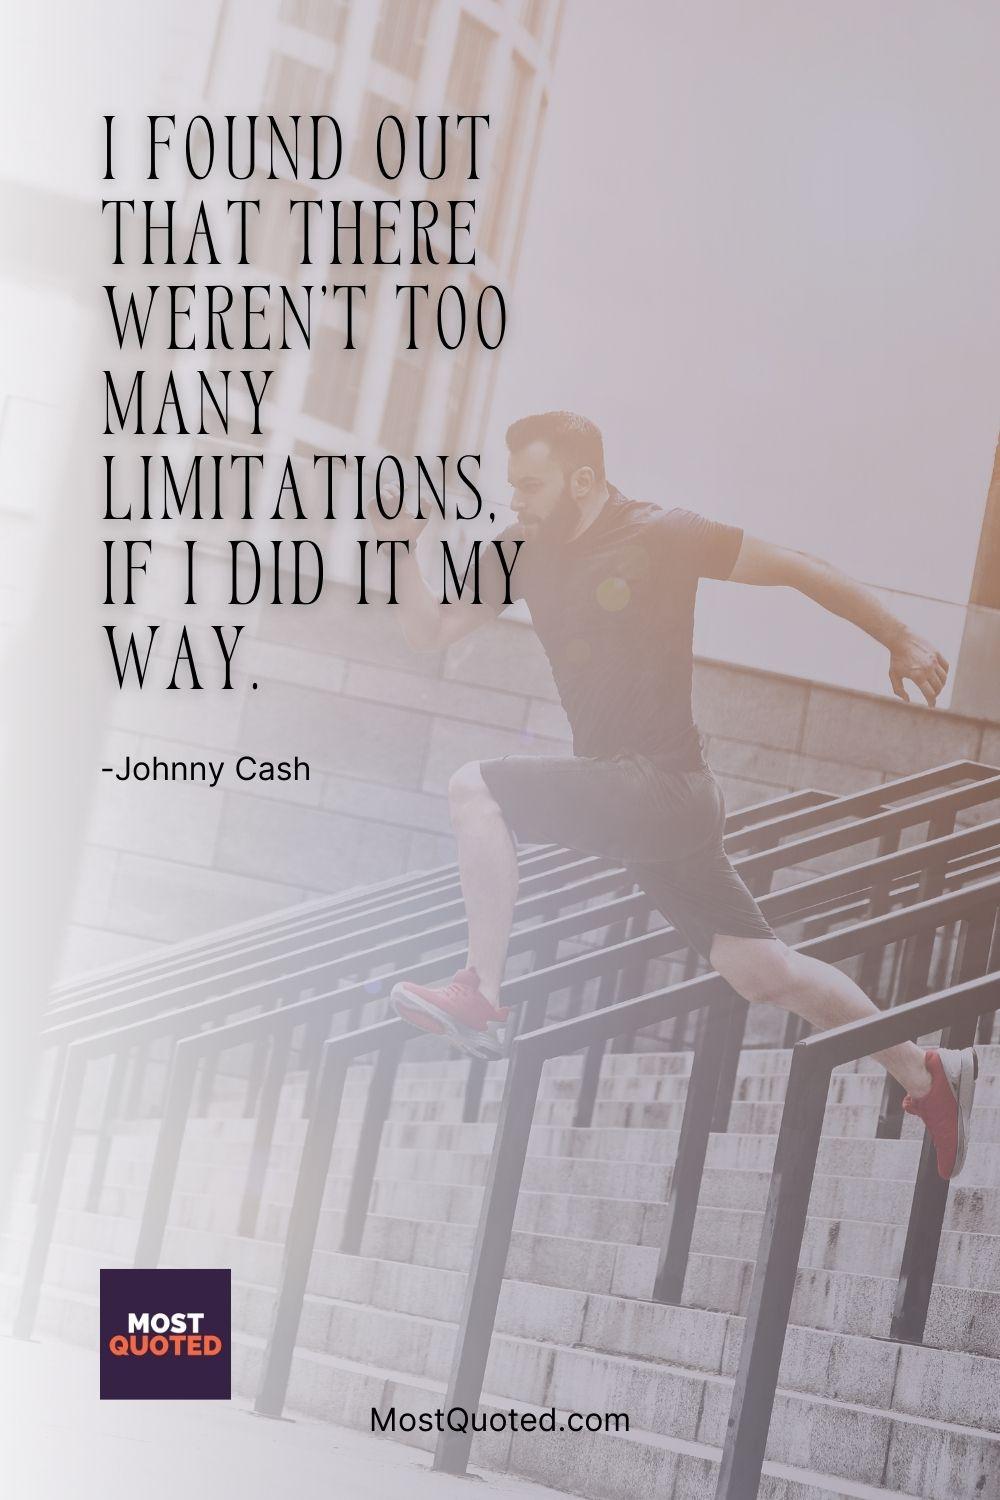 I found out that there weren't too many limitations, if I did it my way. - Johnny Cash